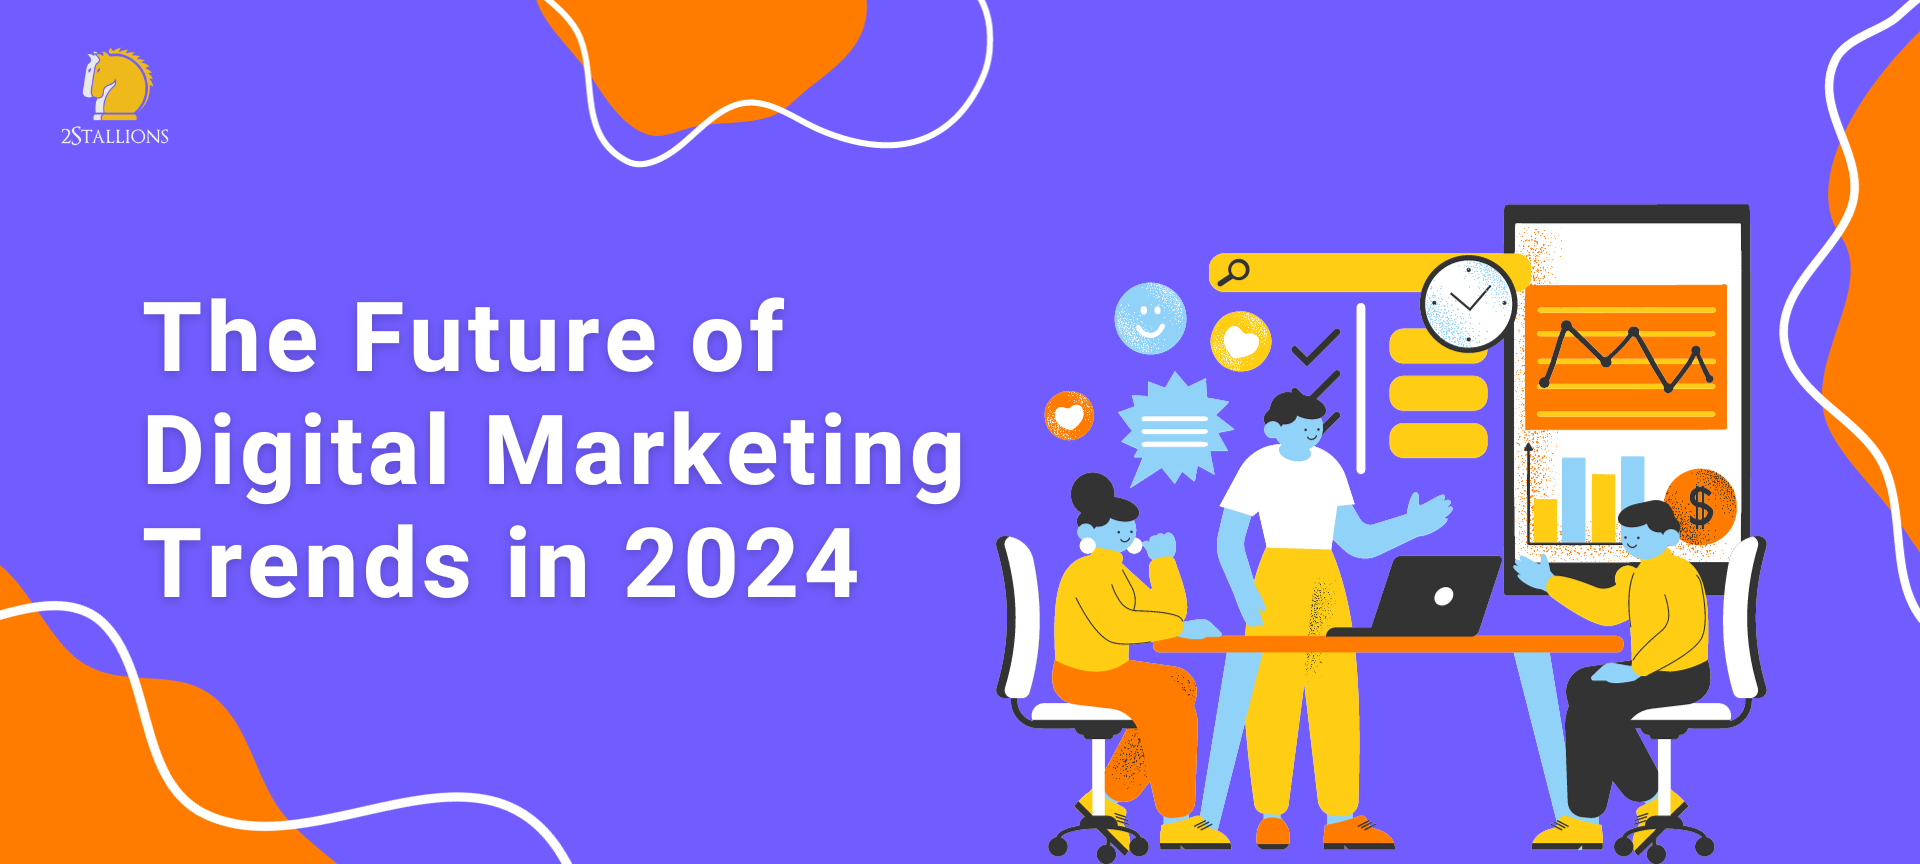 The Future of Digital Marketing Trends in 2024